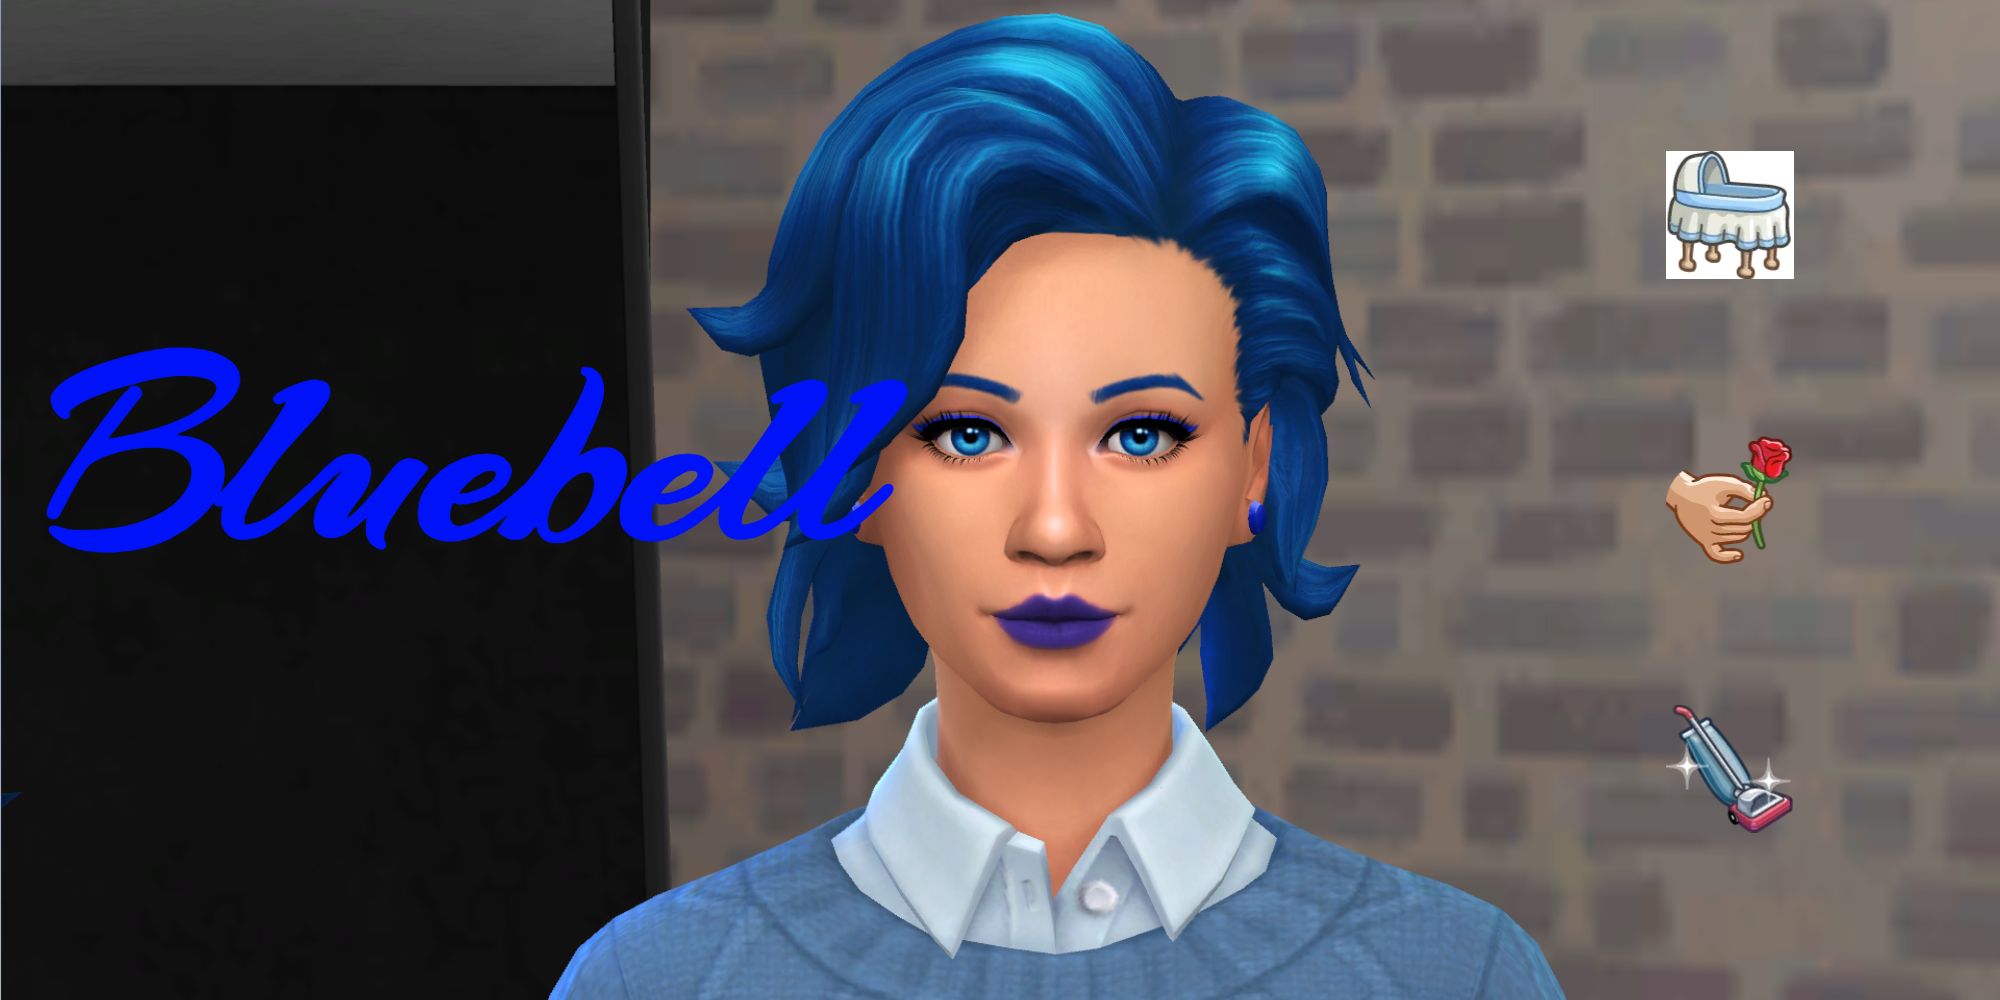 A blue-haired Sim from the bluebell generation